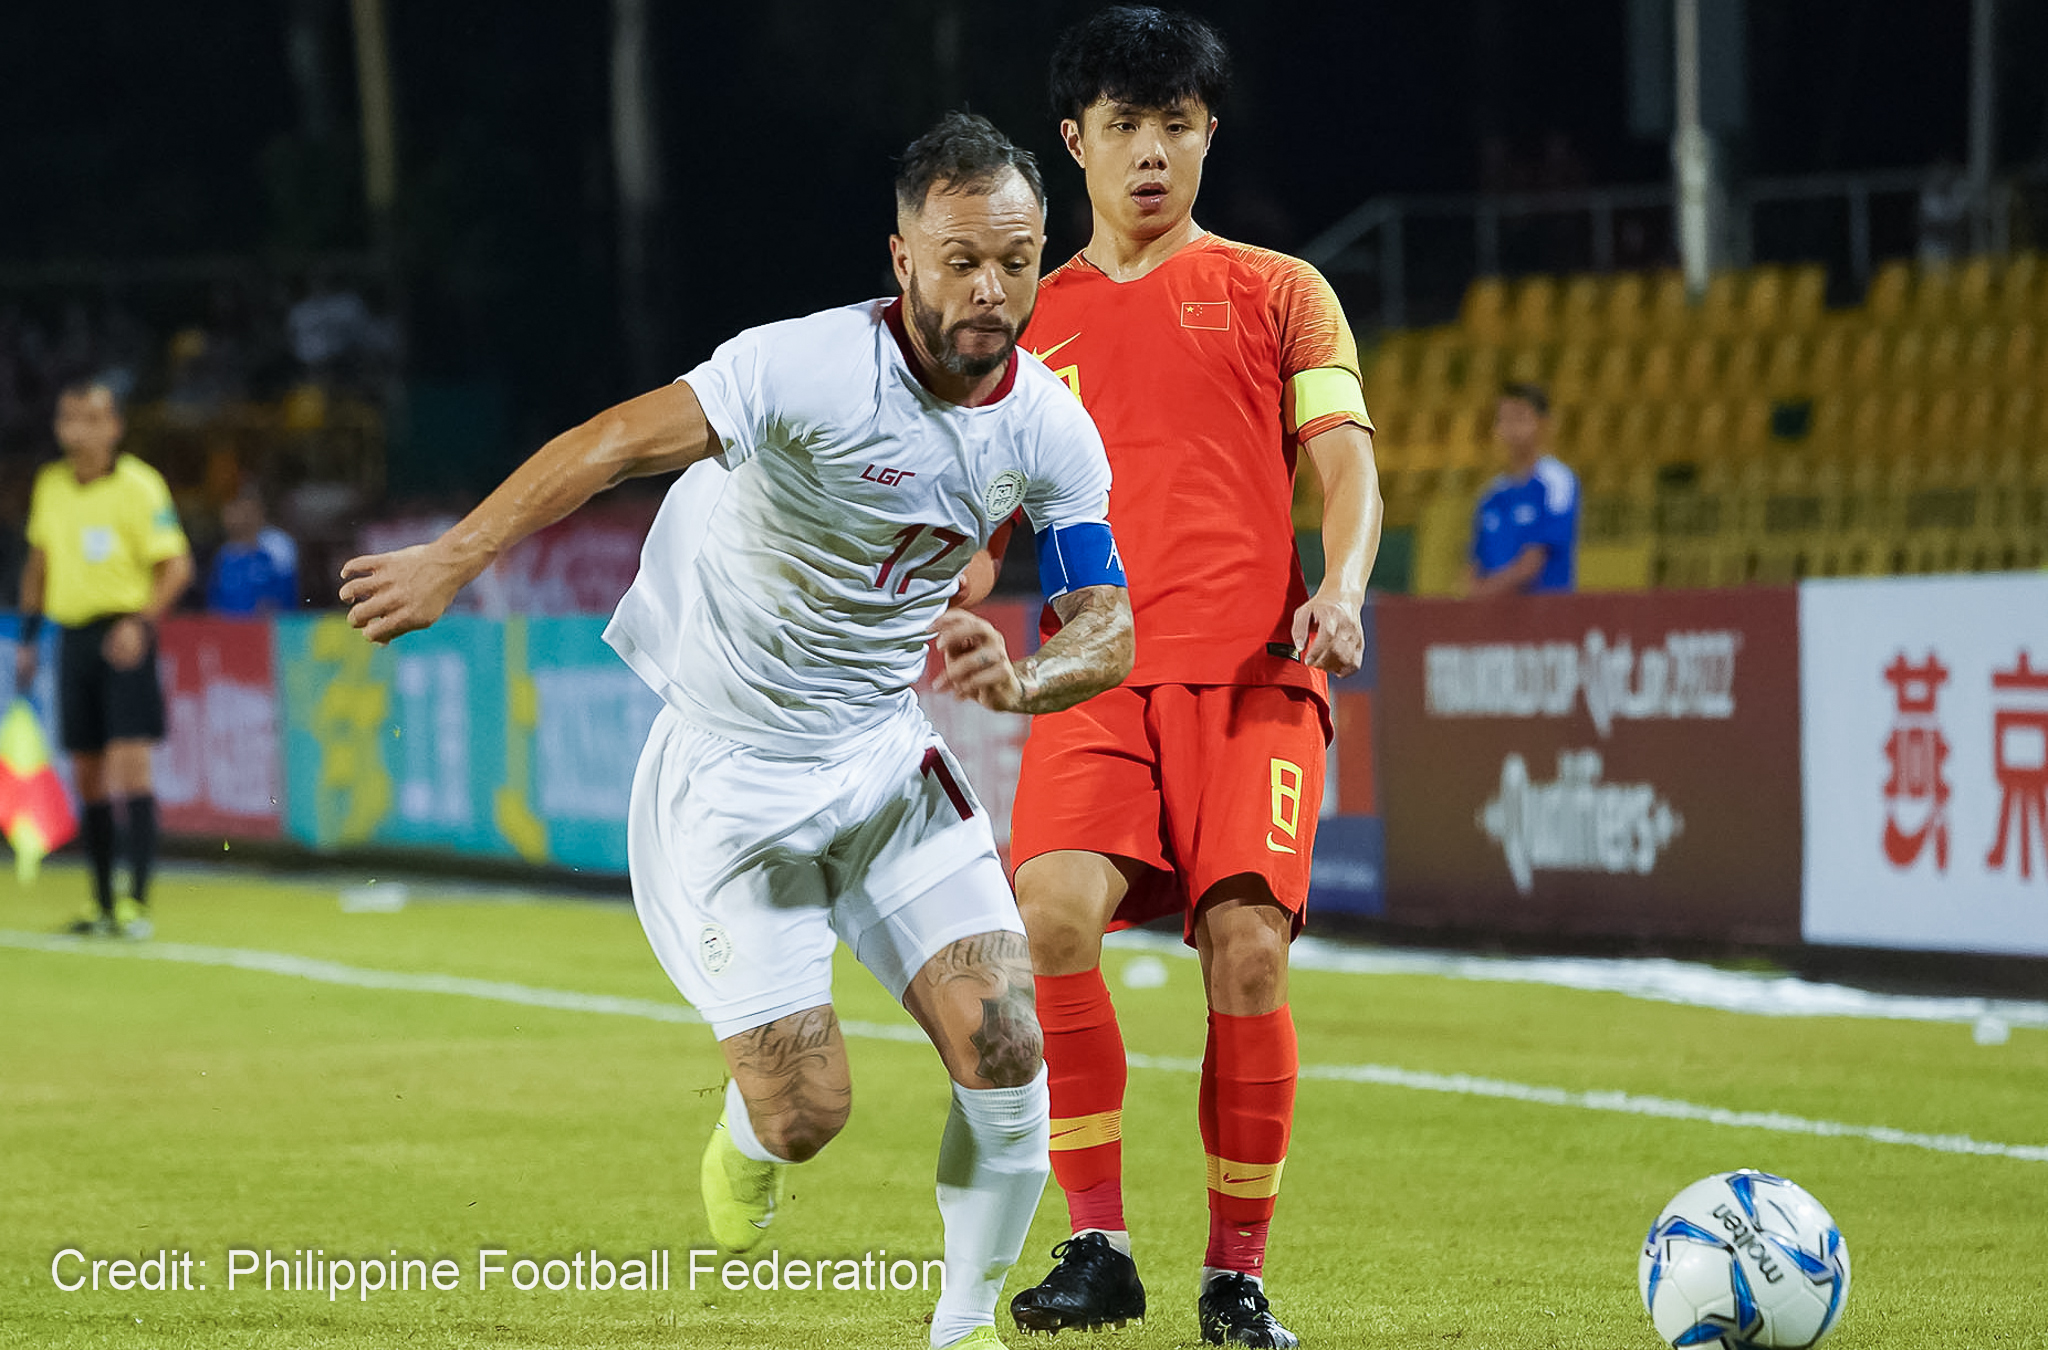 Azkals keep China scoreless to secure draw in World Cup qualifier